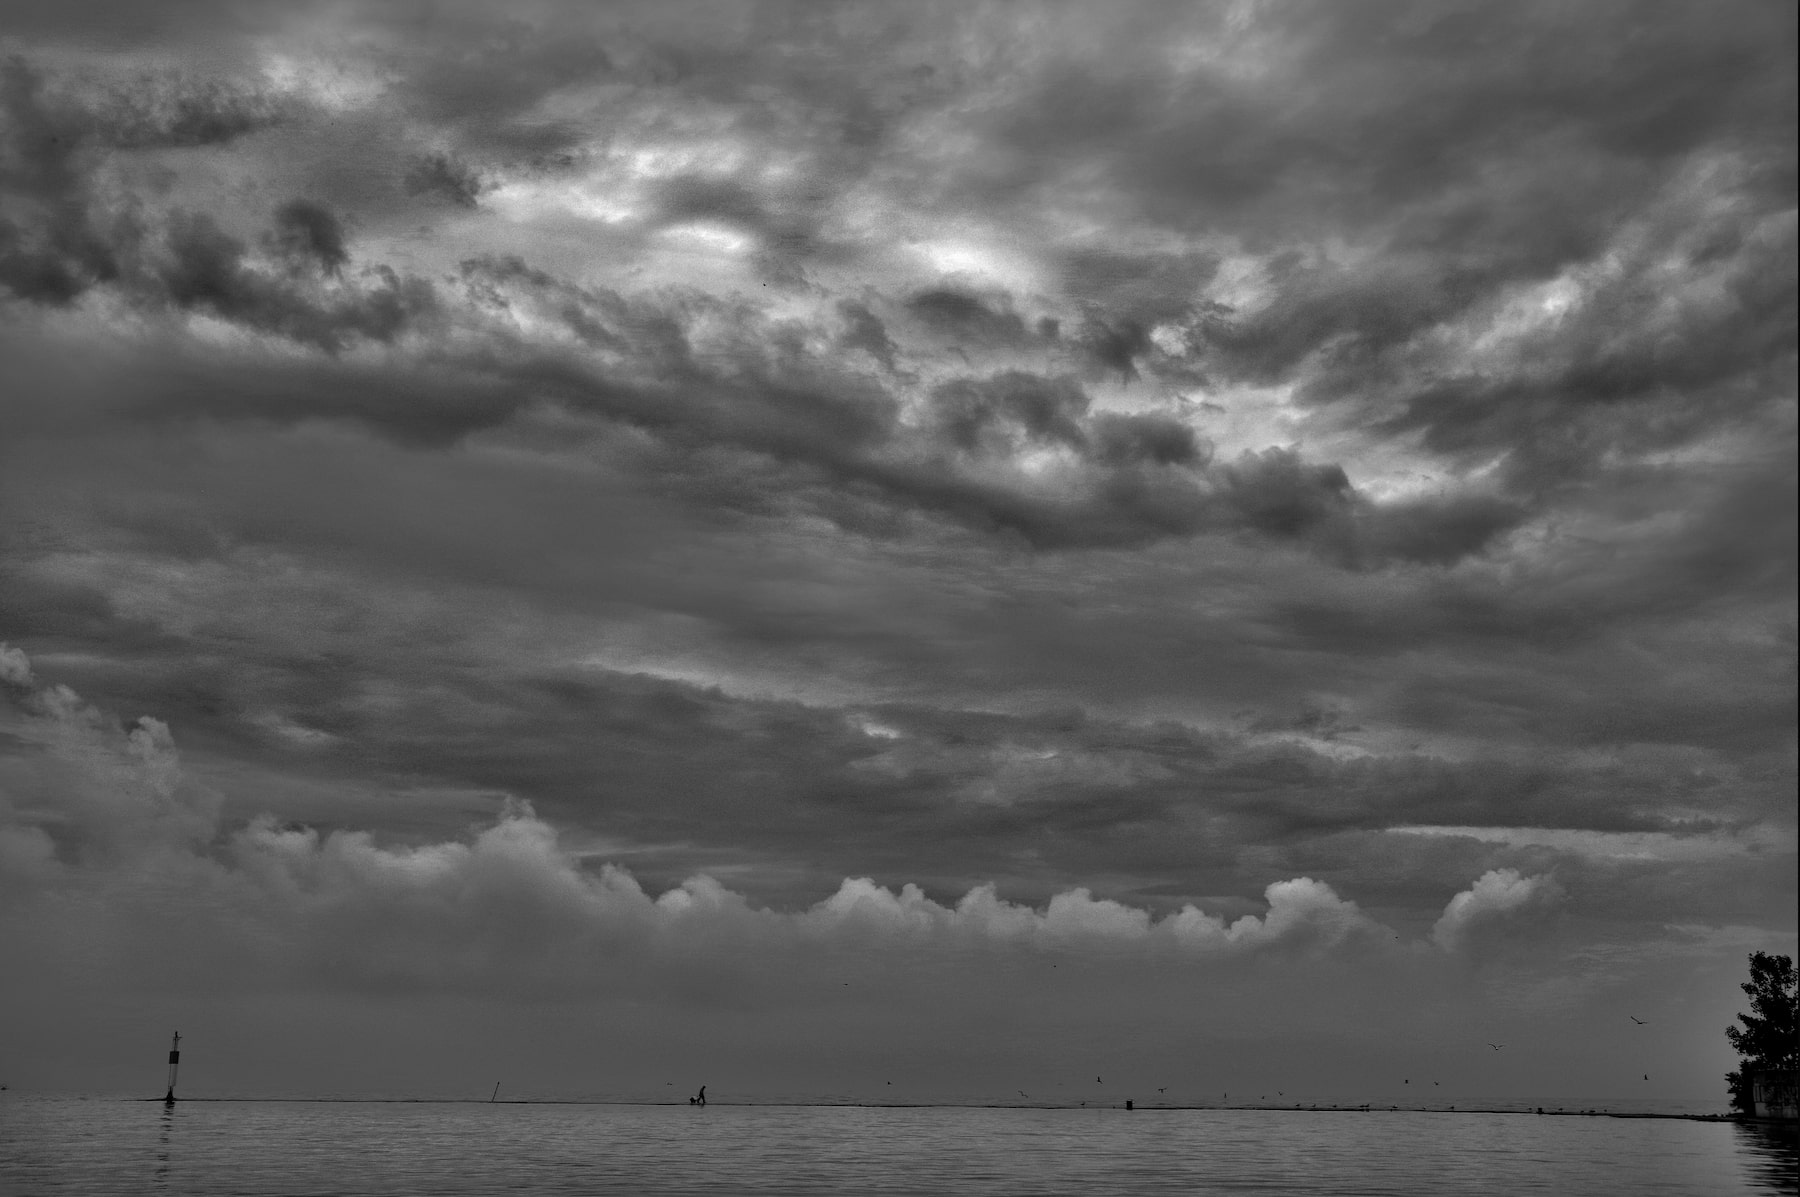 a fisherman looking very small walking along a breakwater with a major storm approaching